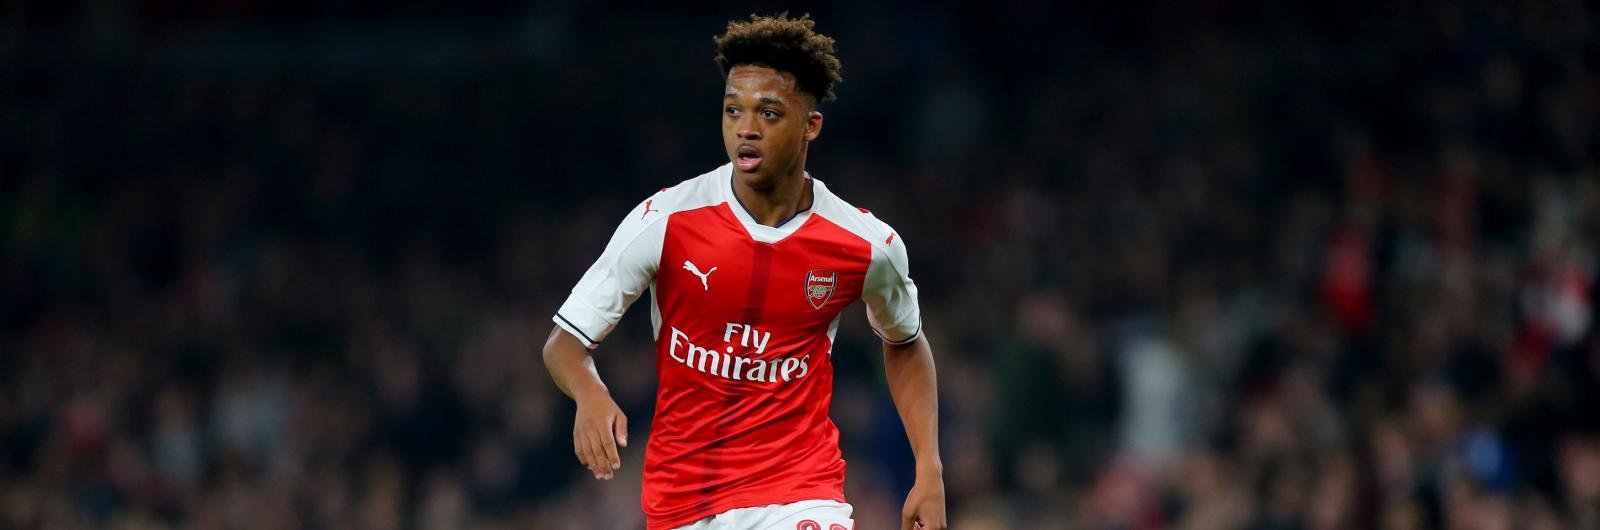 Manchester United looking to snatch Arsenal’s 18-year-old wonderkid